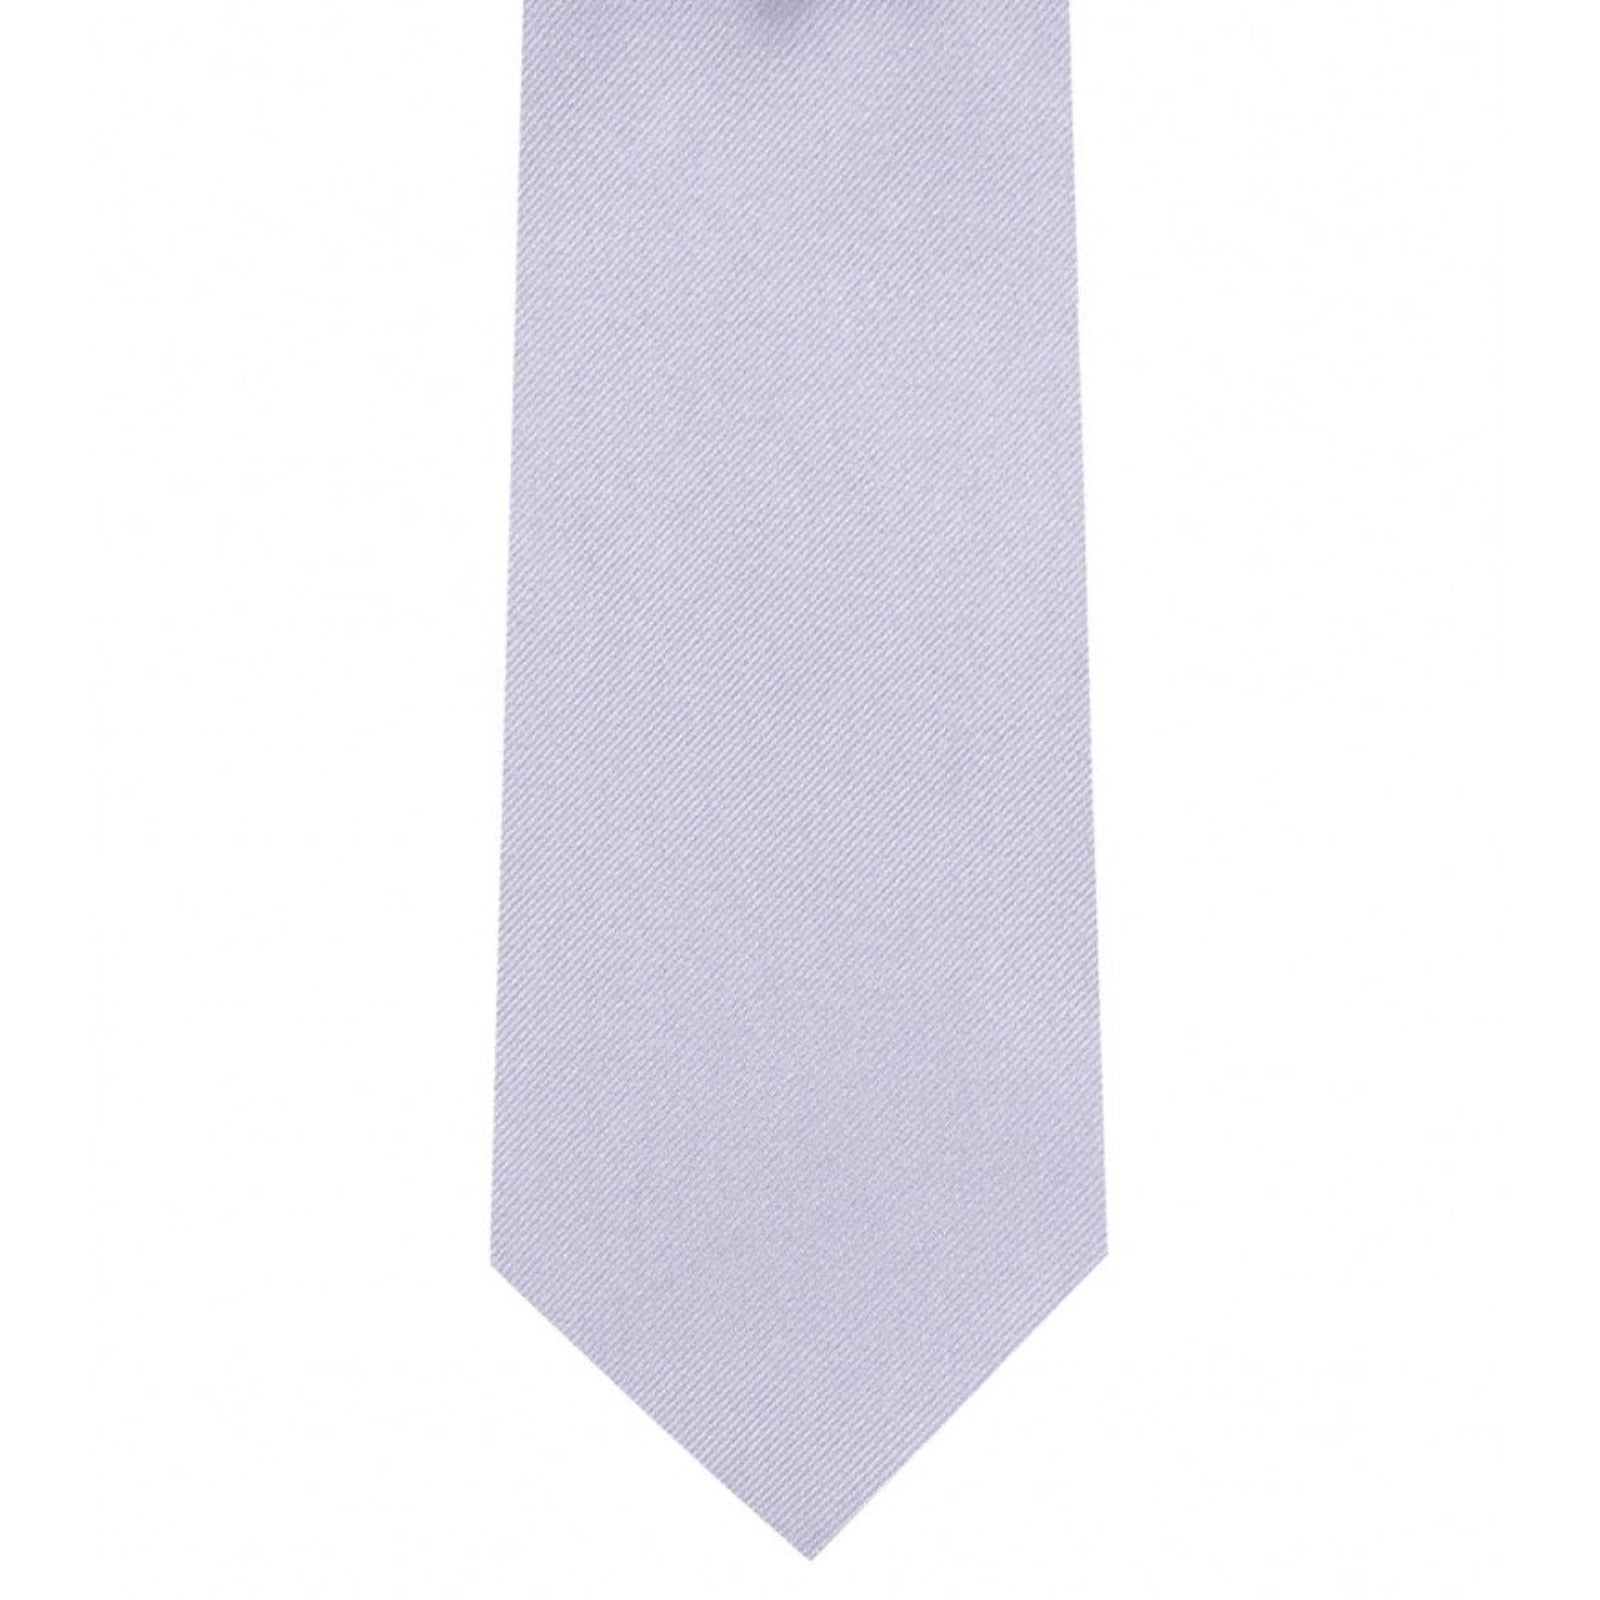 Classic Light Lilac Tie Ultra Skinny tie width 2.25 inches With Matching Pocket Square | KCT Menswear